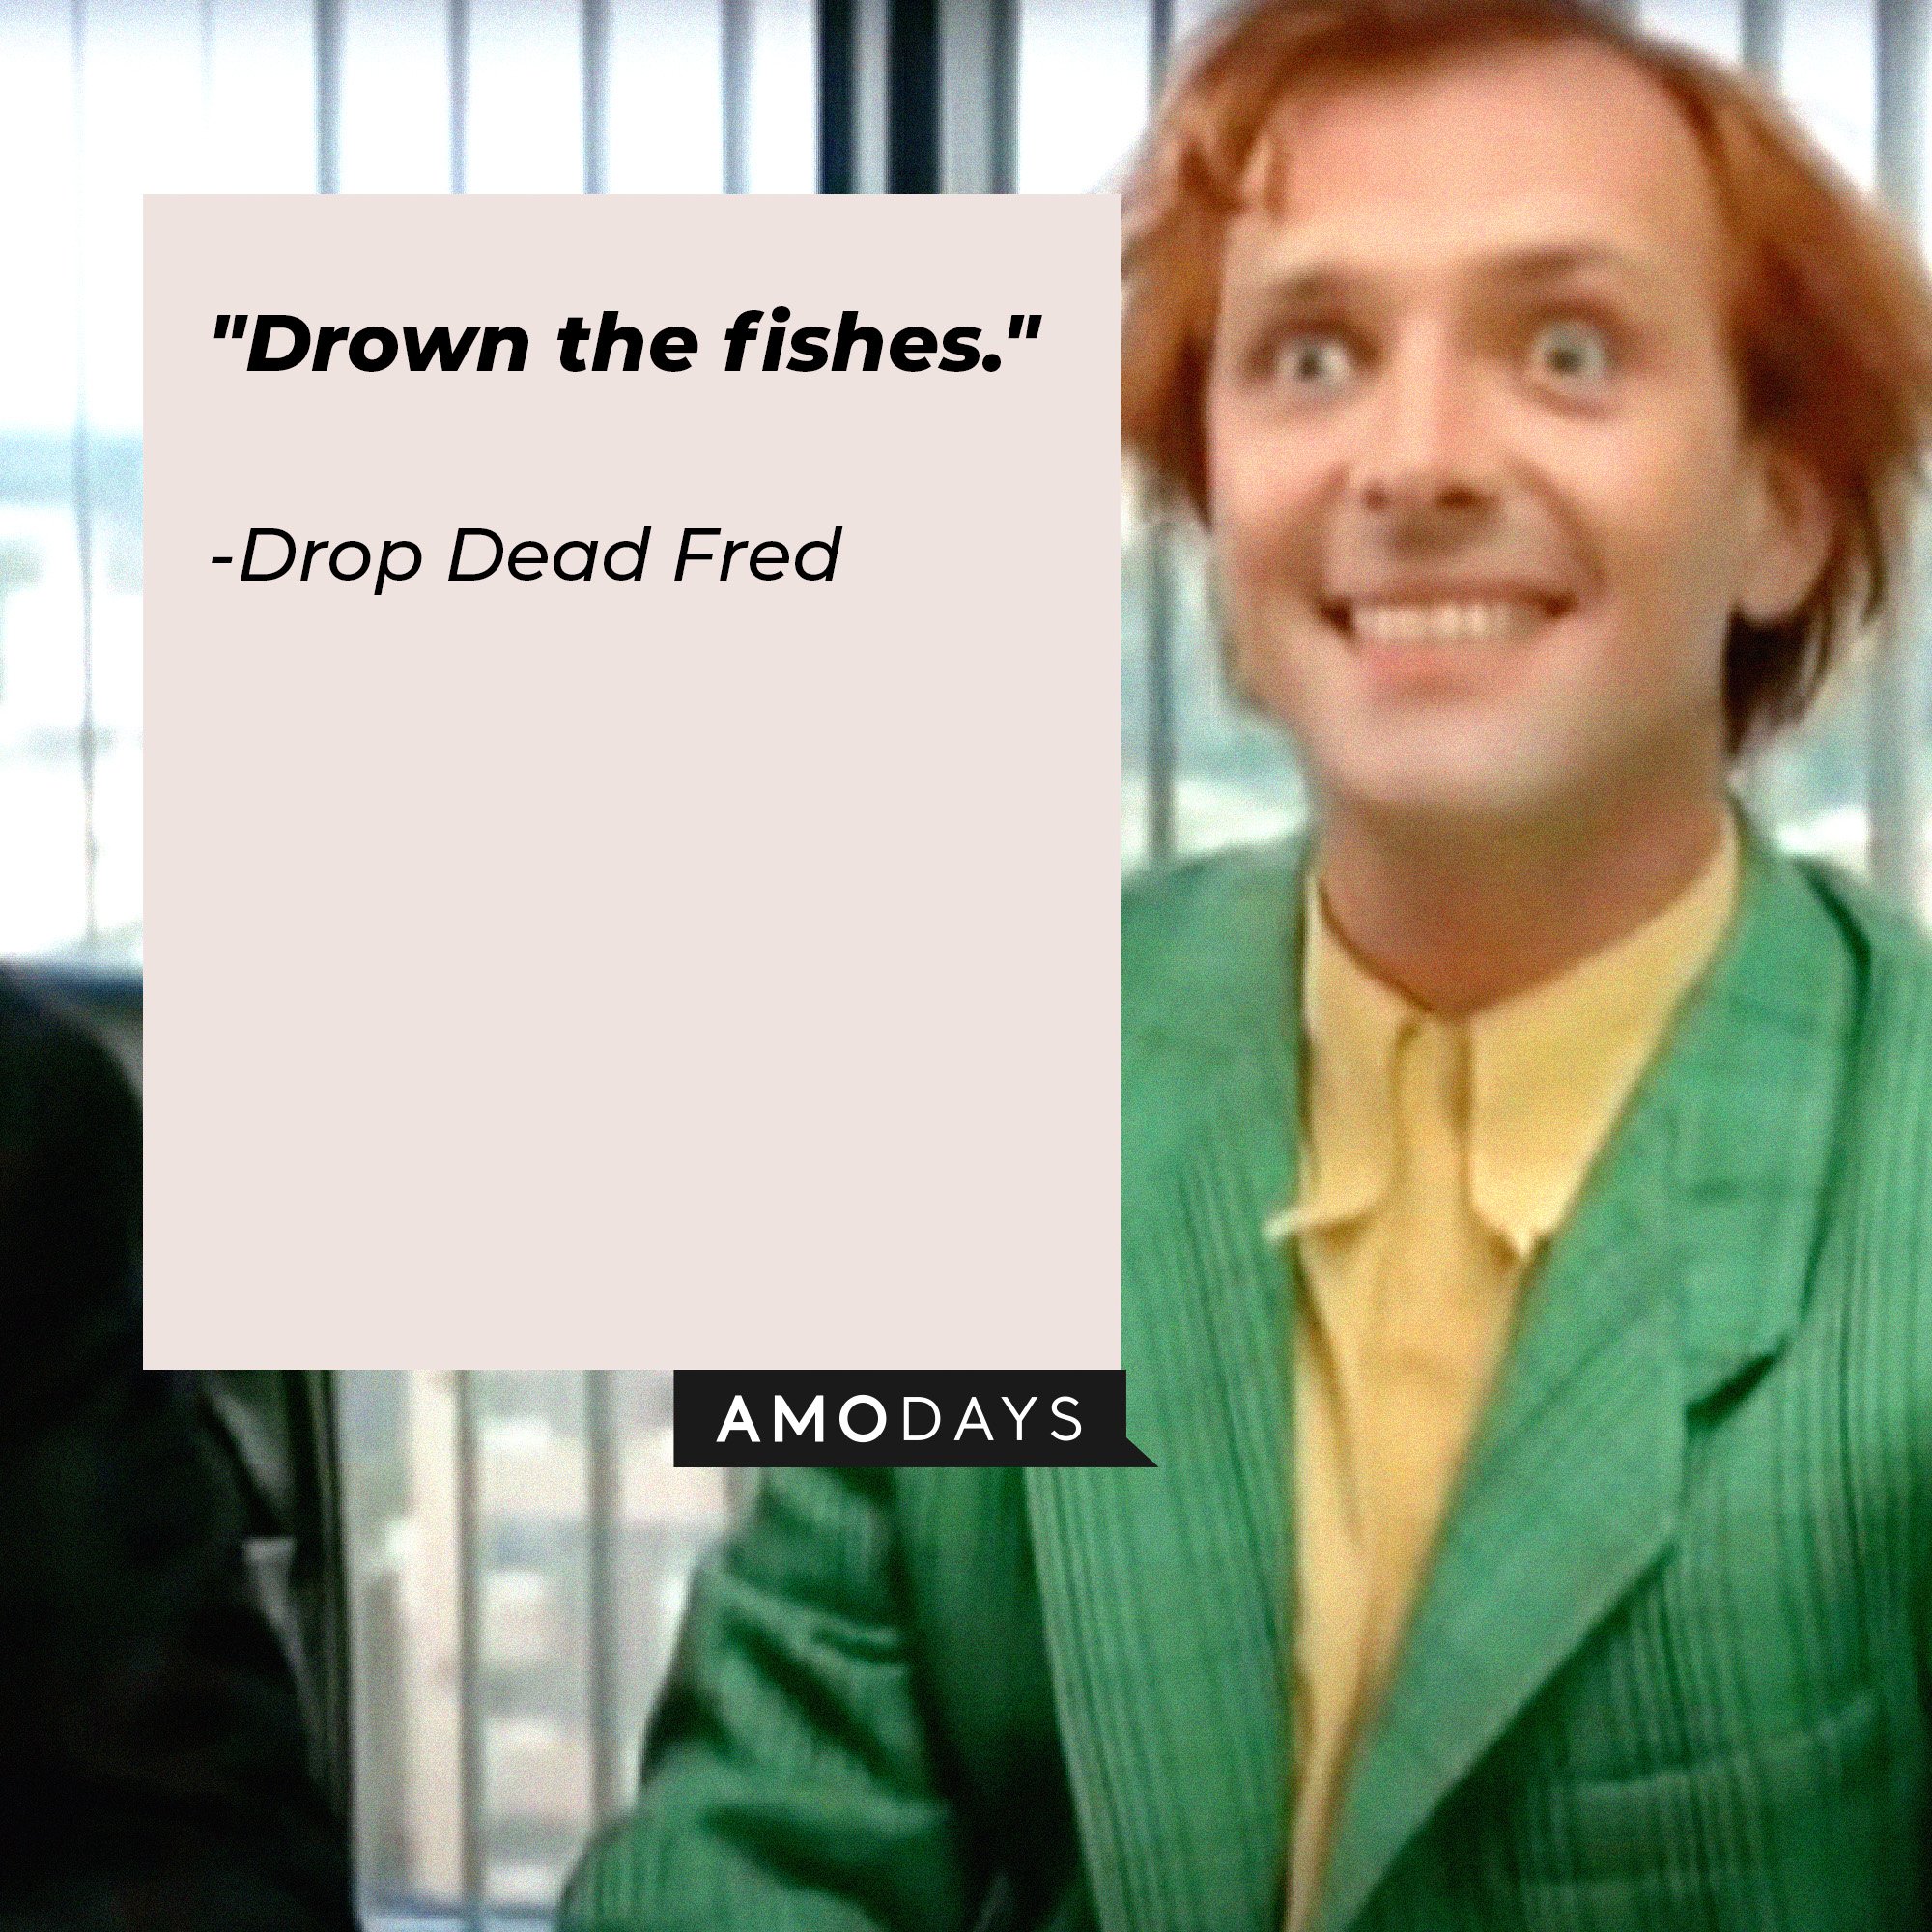 Drop Dead Fred's quote: "Drown the fishes."  | Image: AmoDays